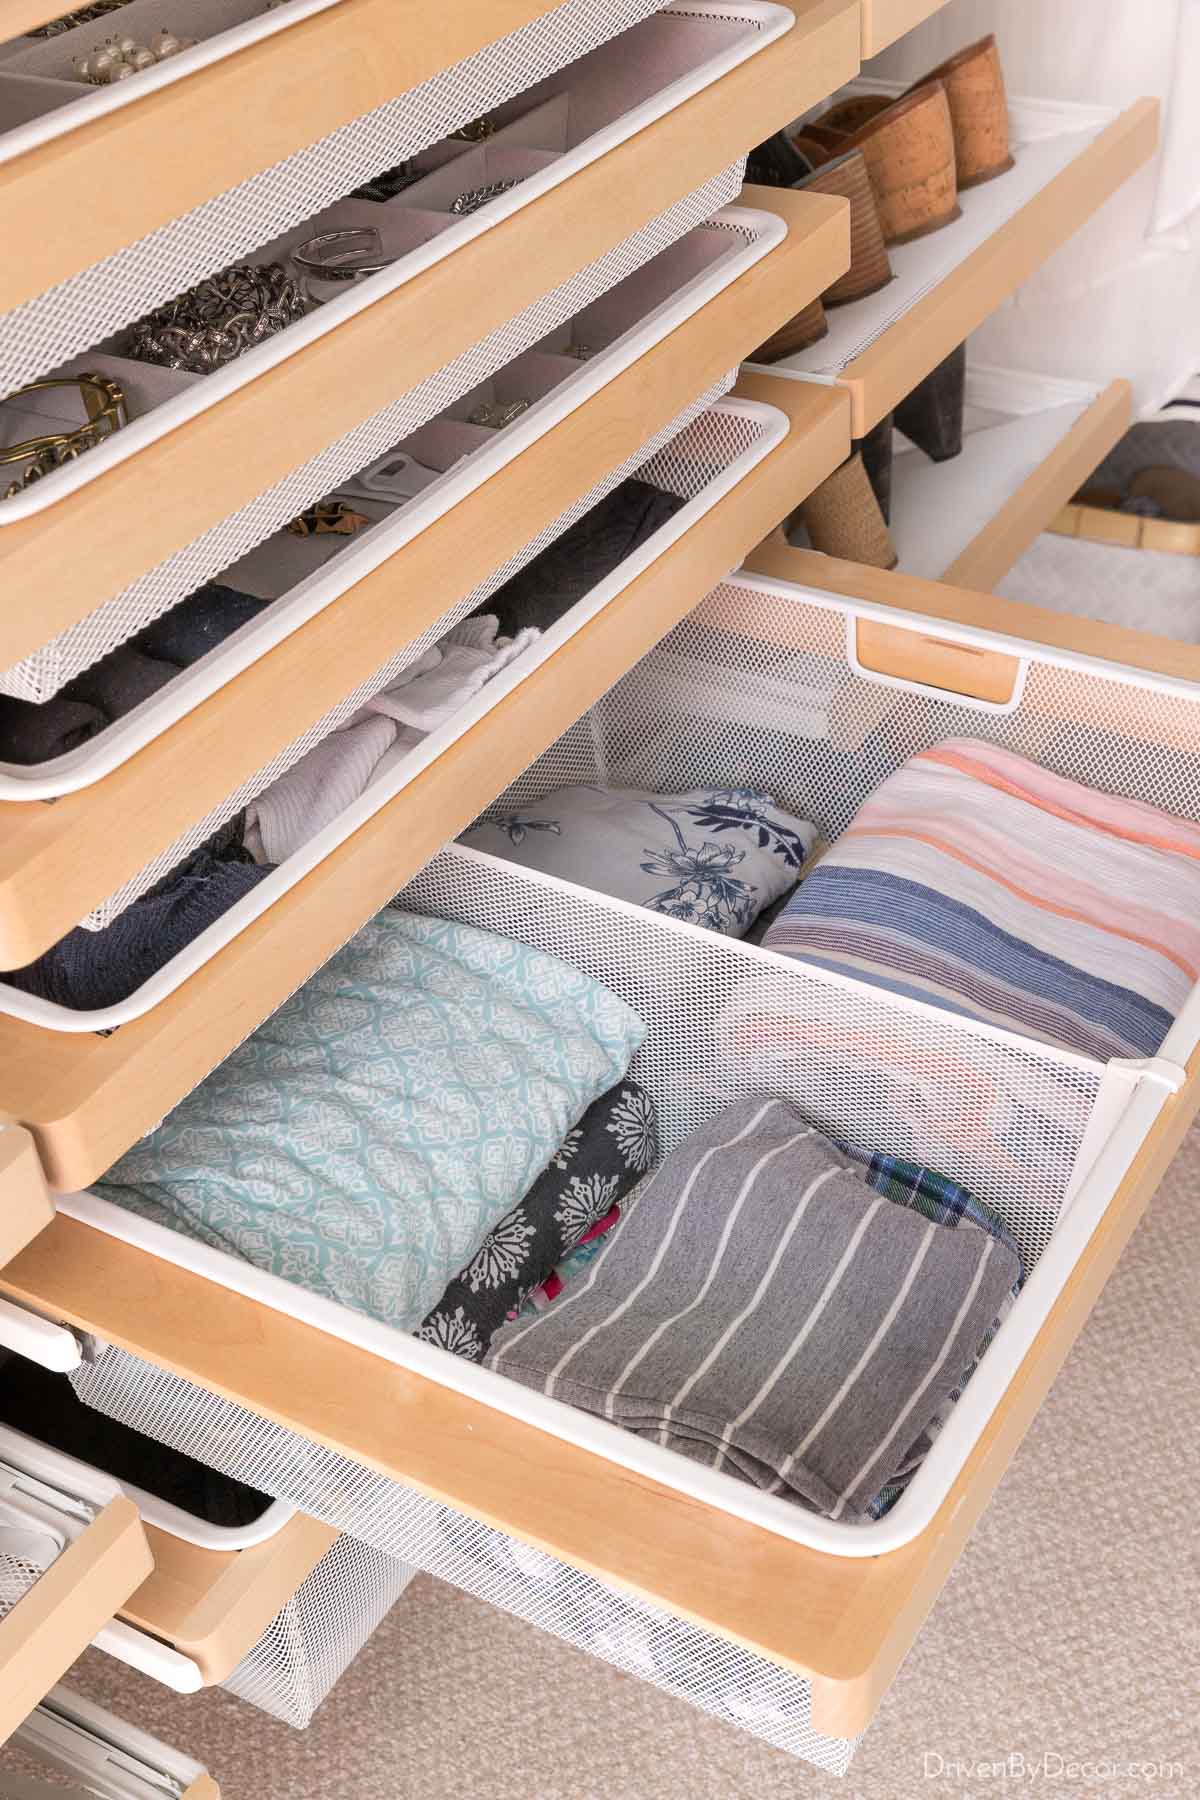 How to Organize your Closet with the Elfa System - Style + Dwell